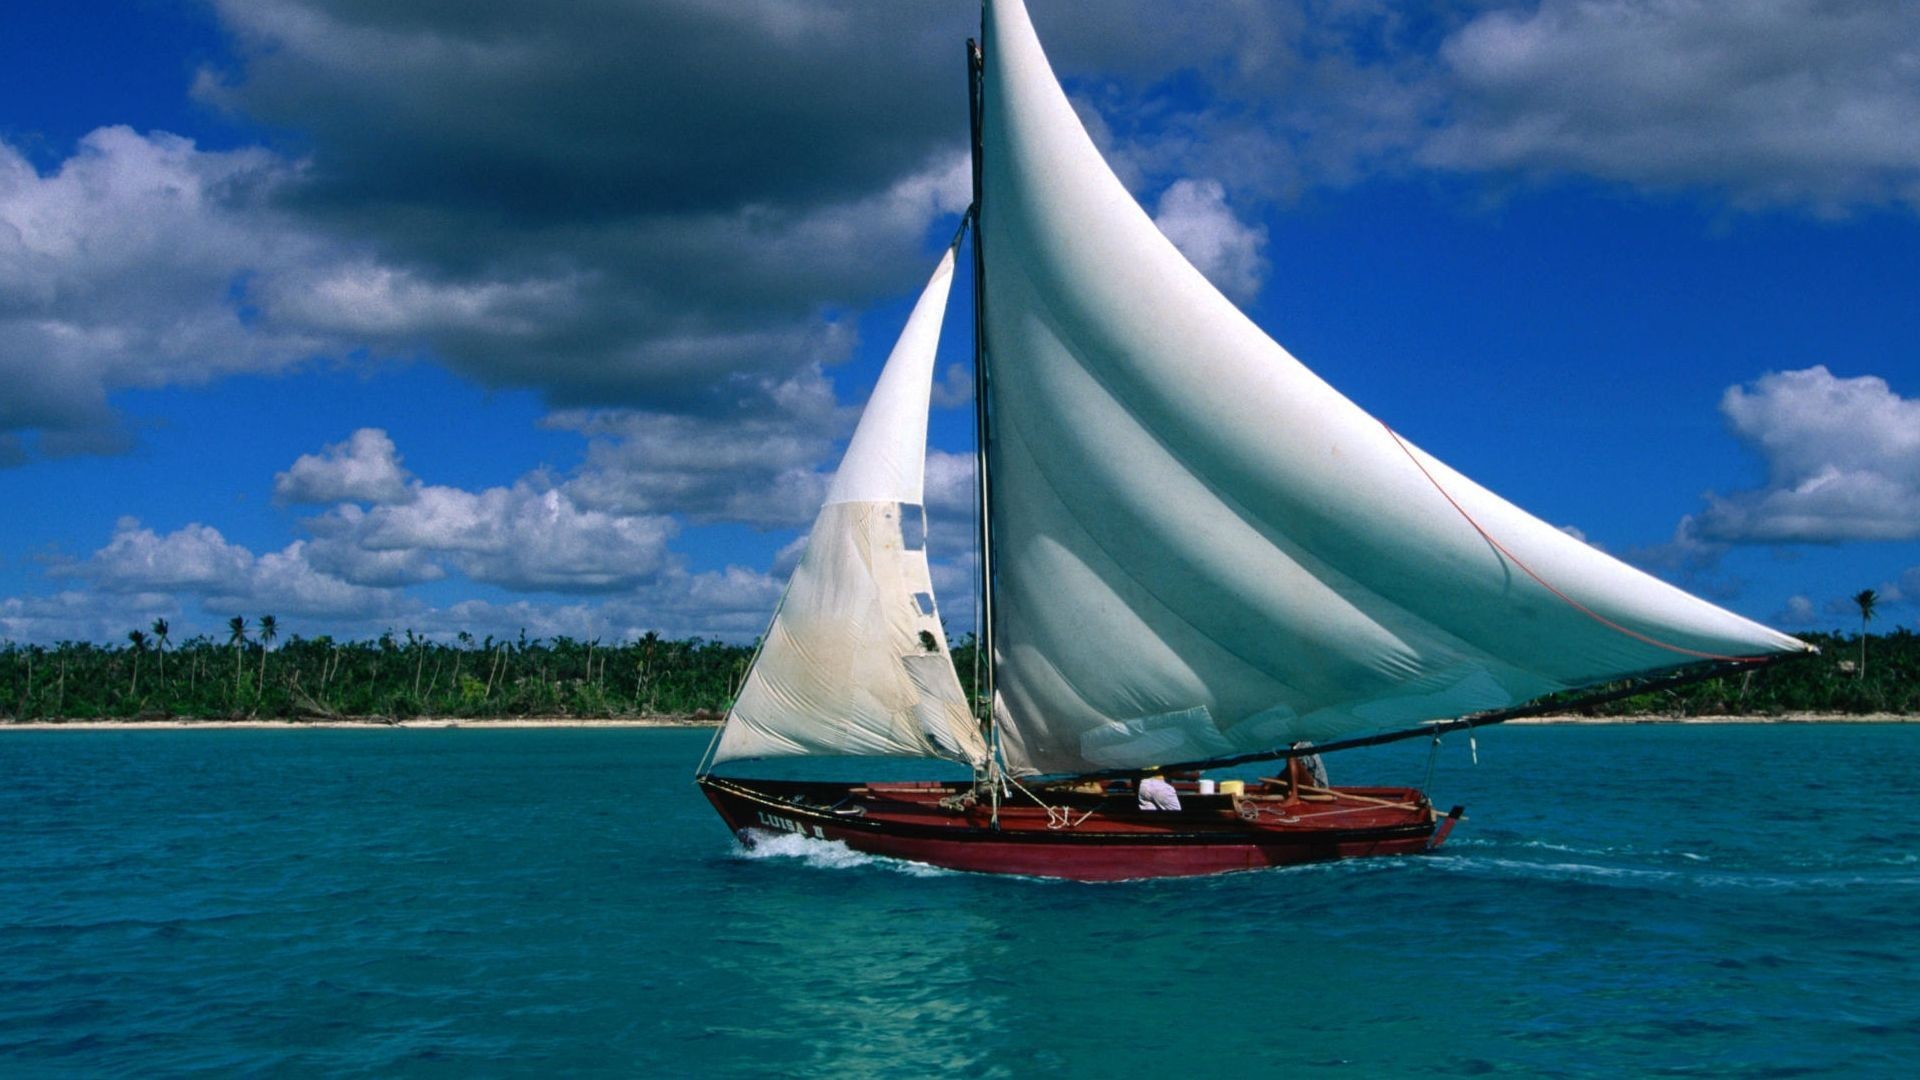 1920x1080 Gallery for - sailing background wallpaper